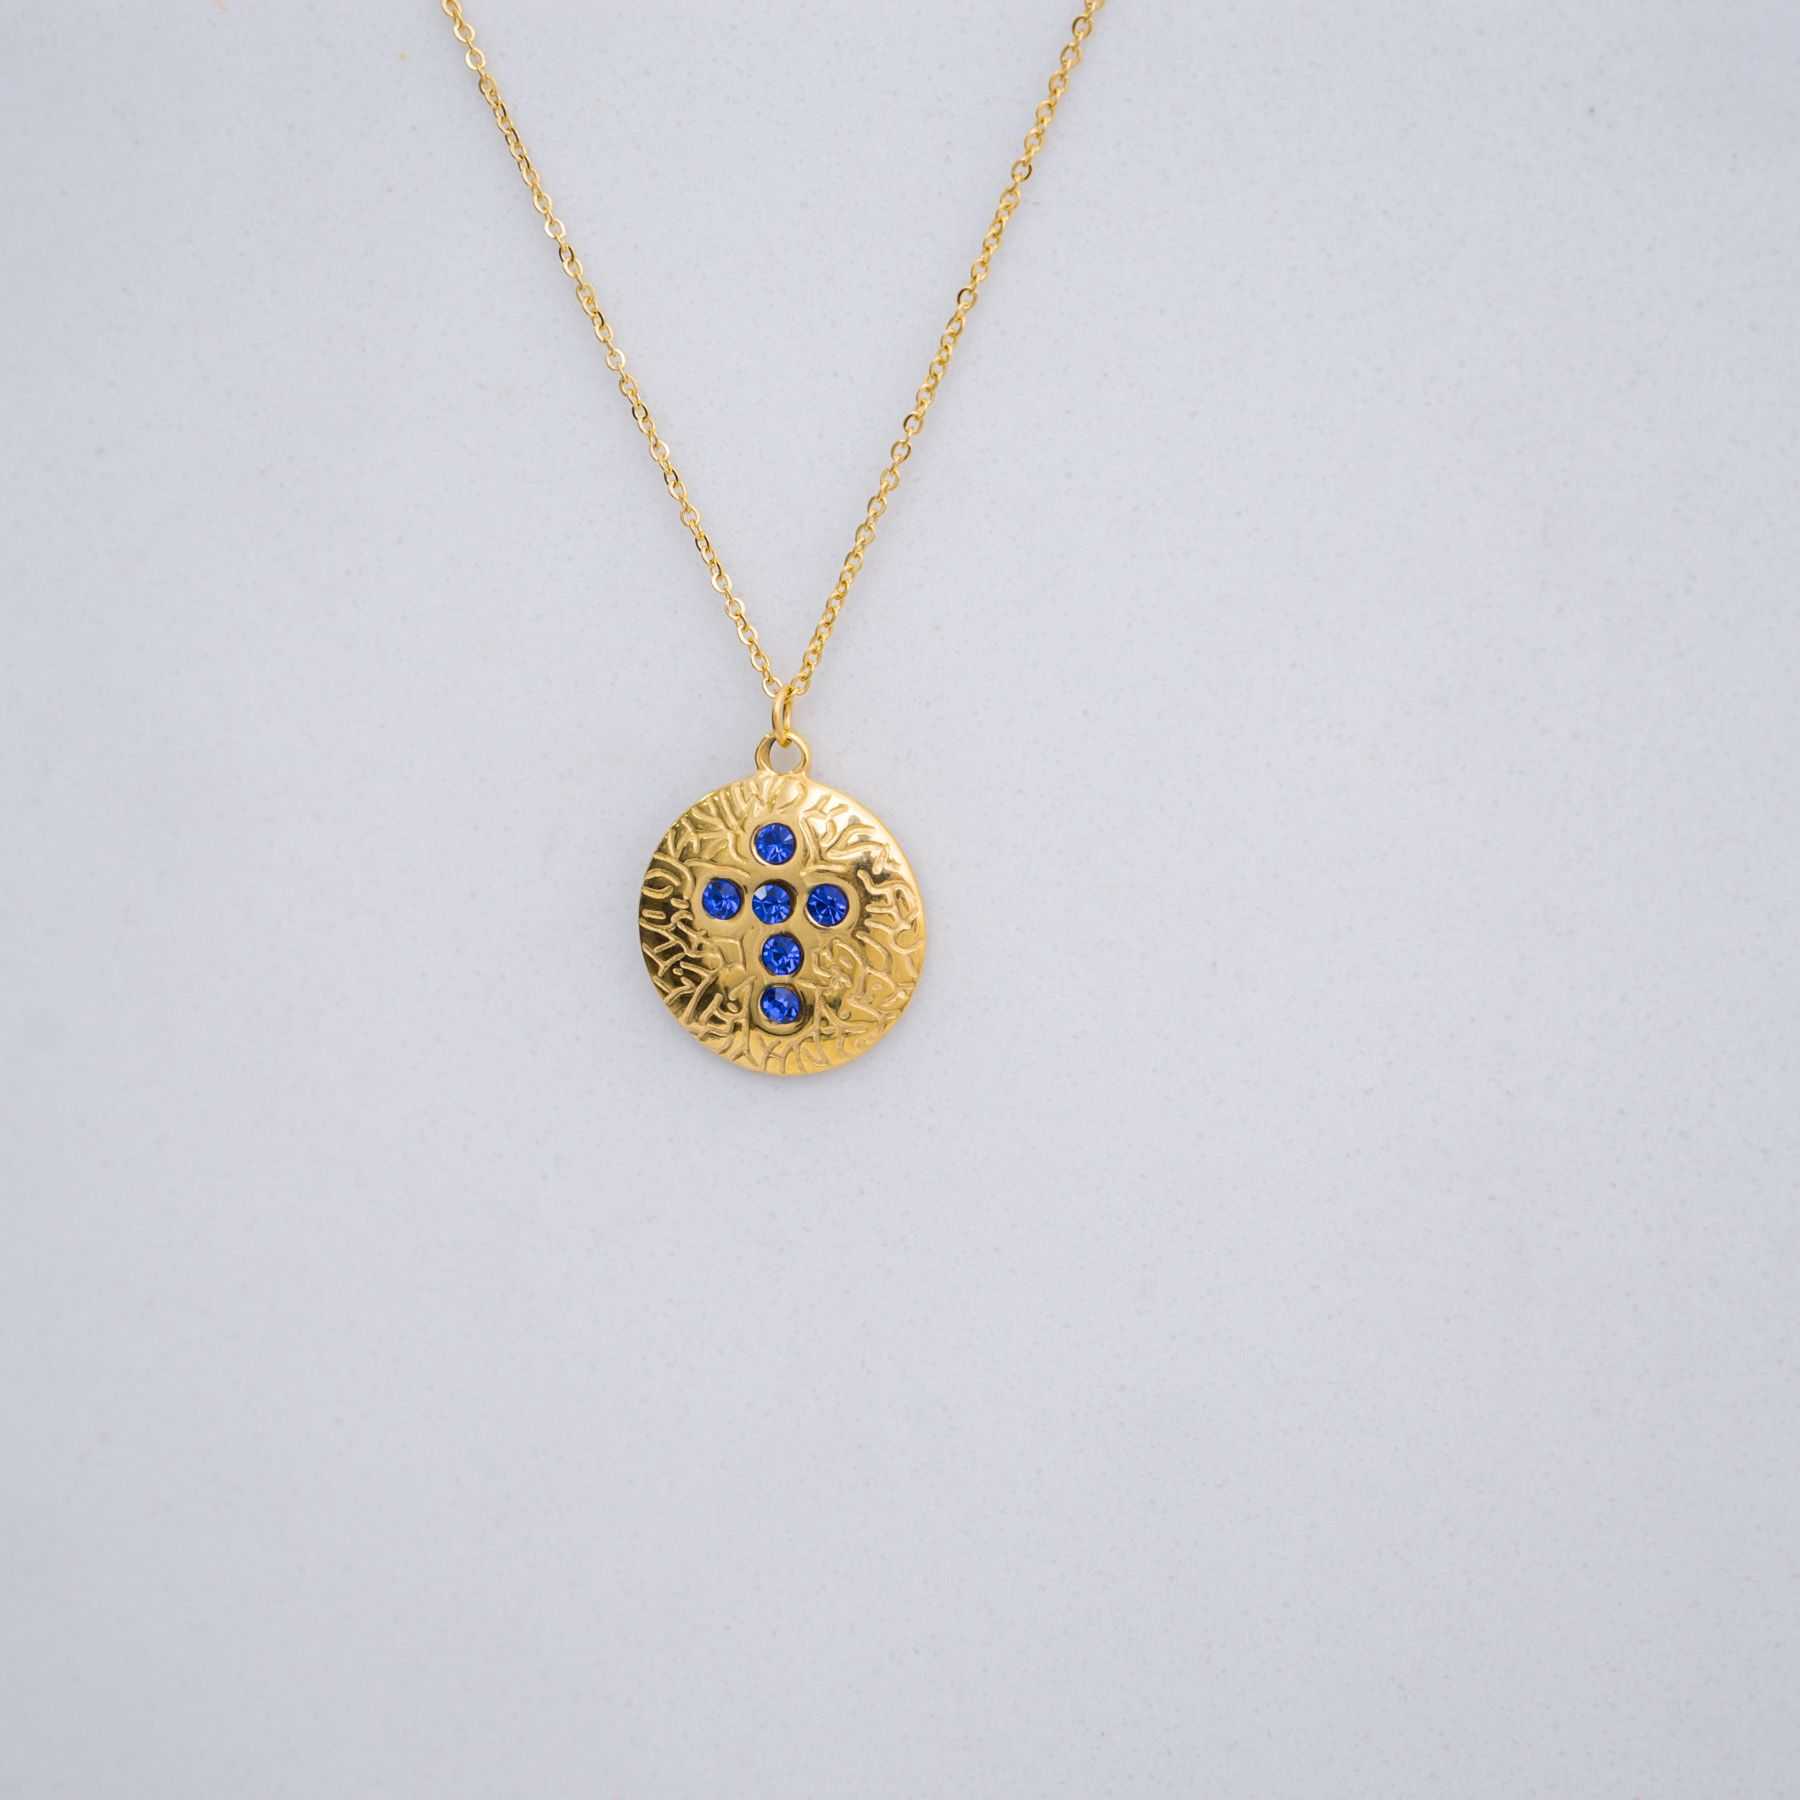 CROSS NECKLACE - GOLD & BLUE